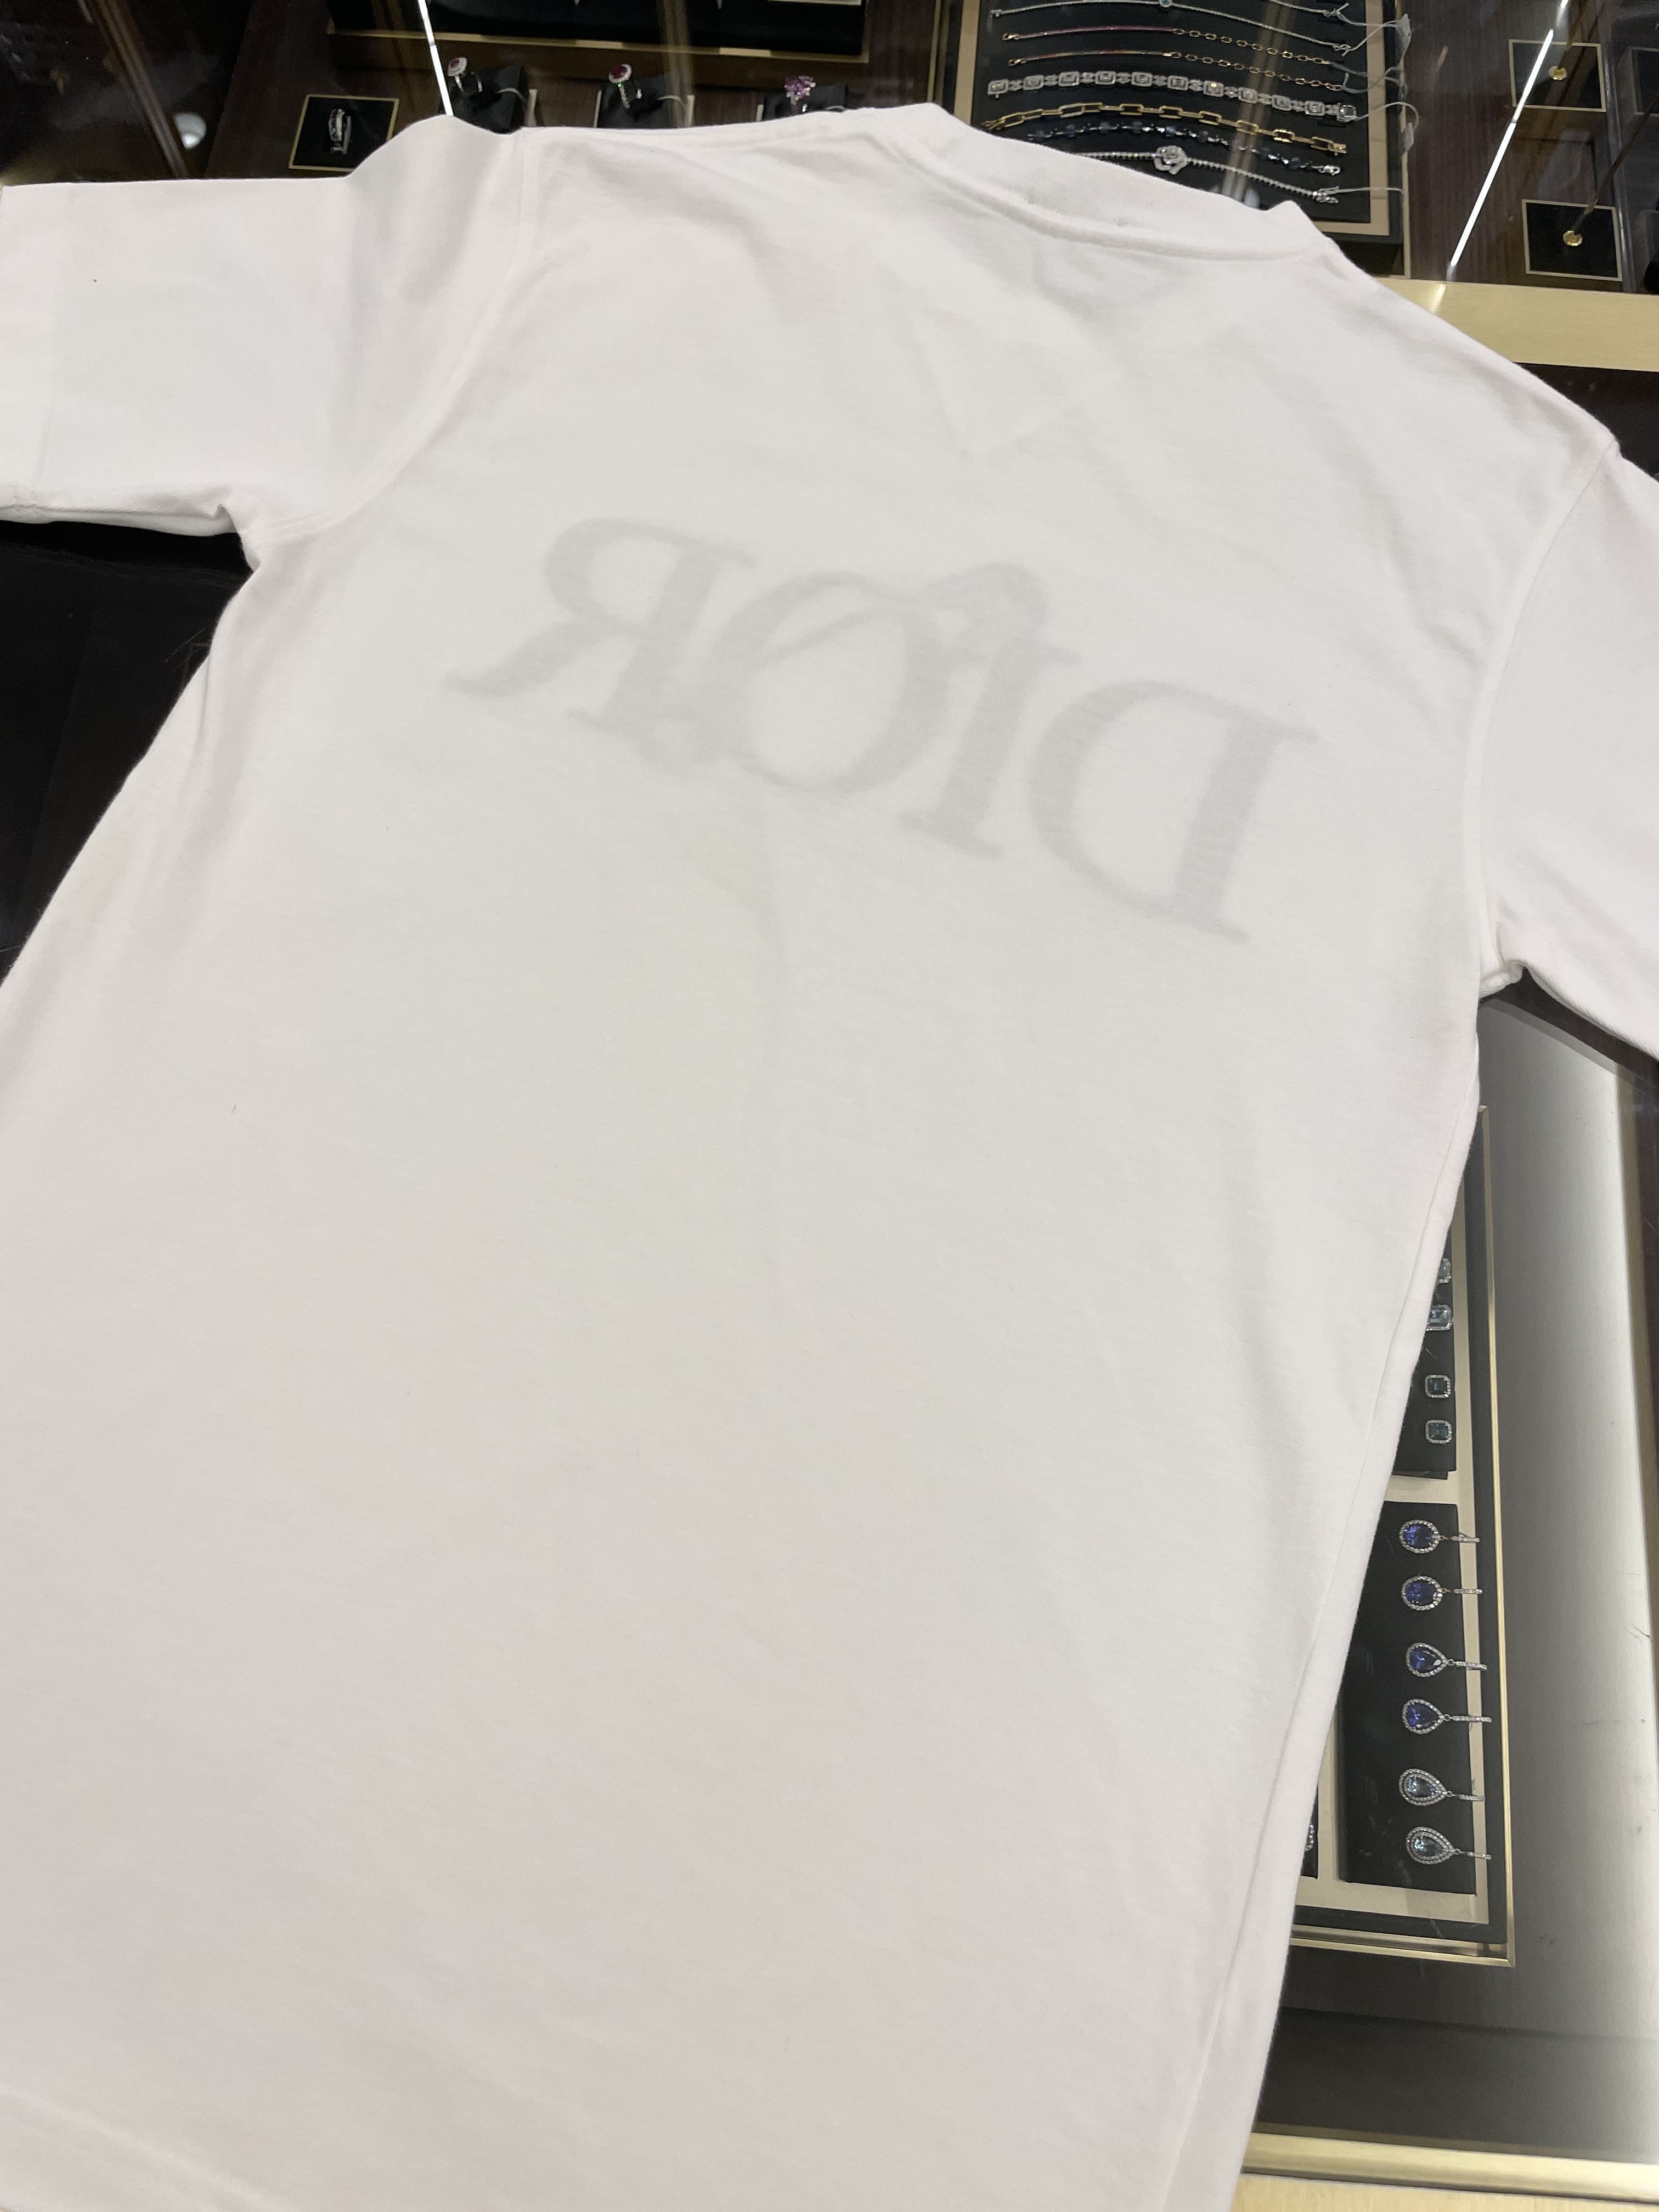 Dior T-Shirt White Embroidered Cotton